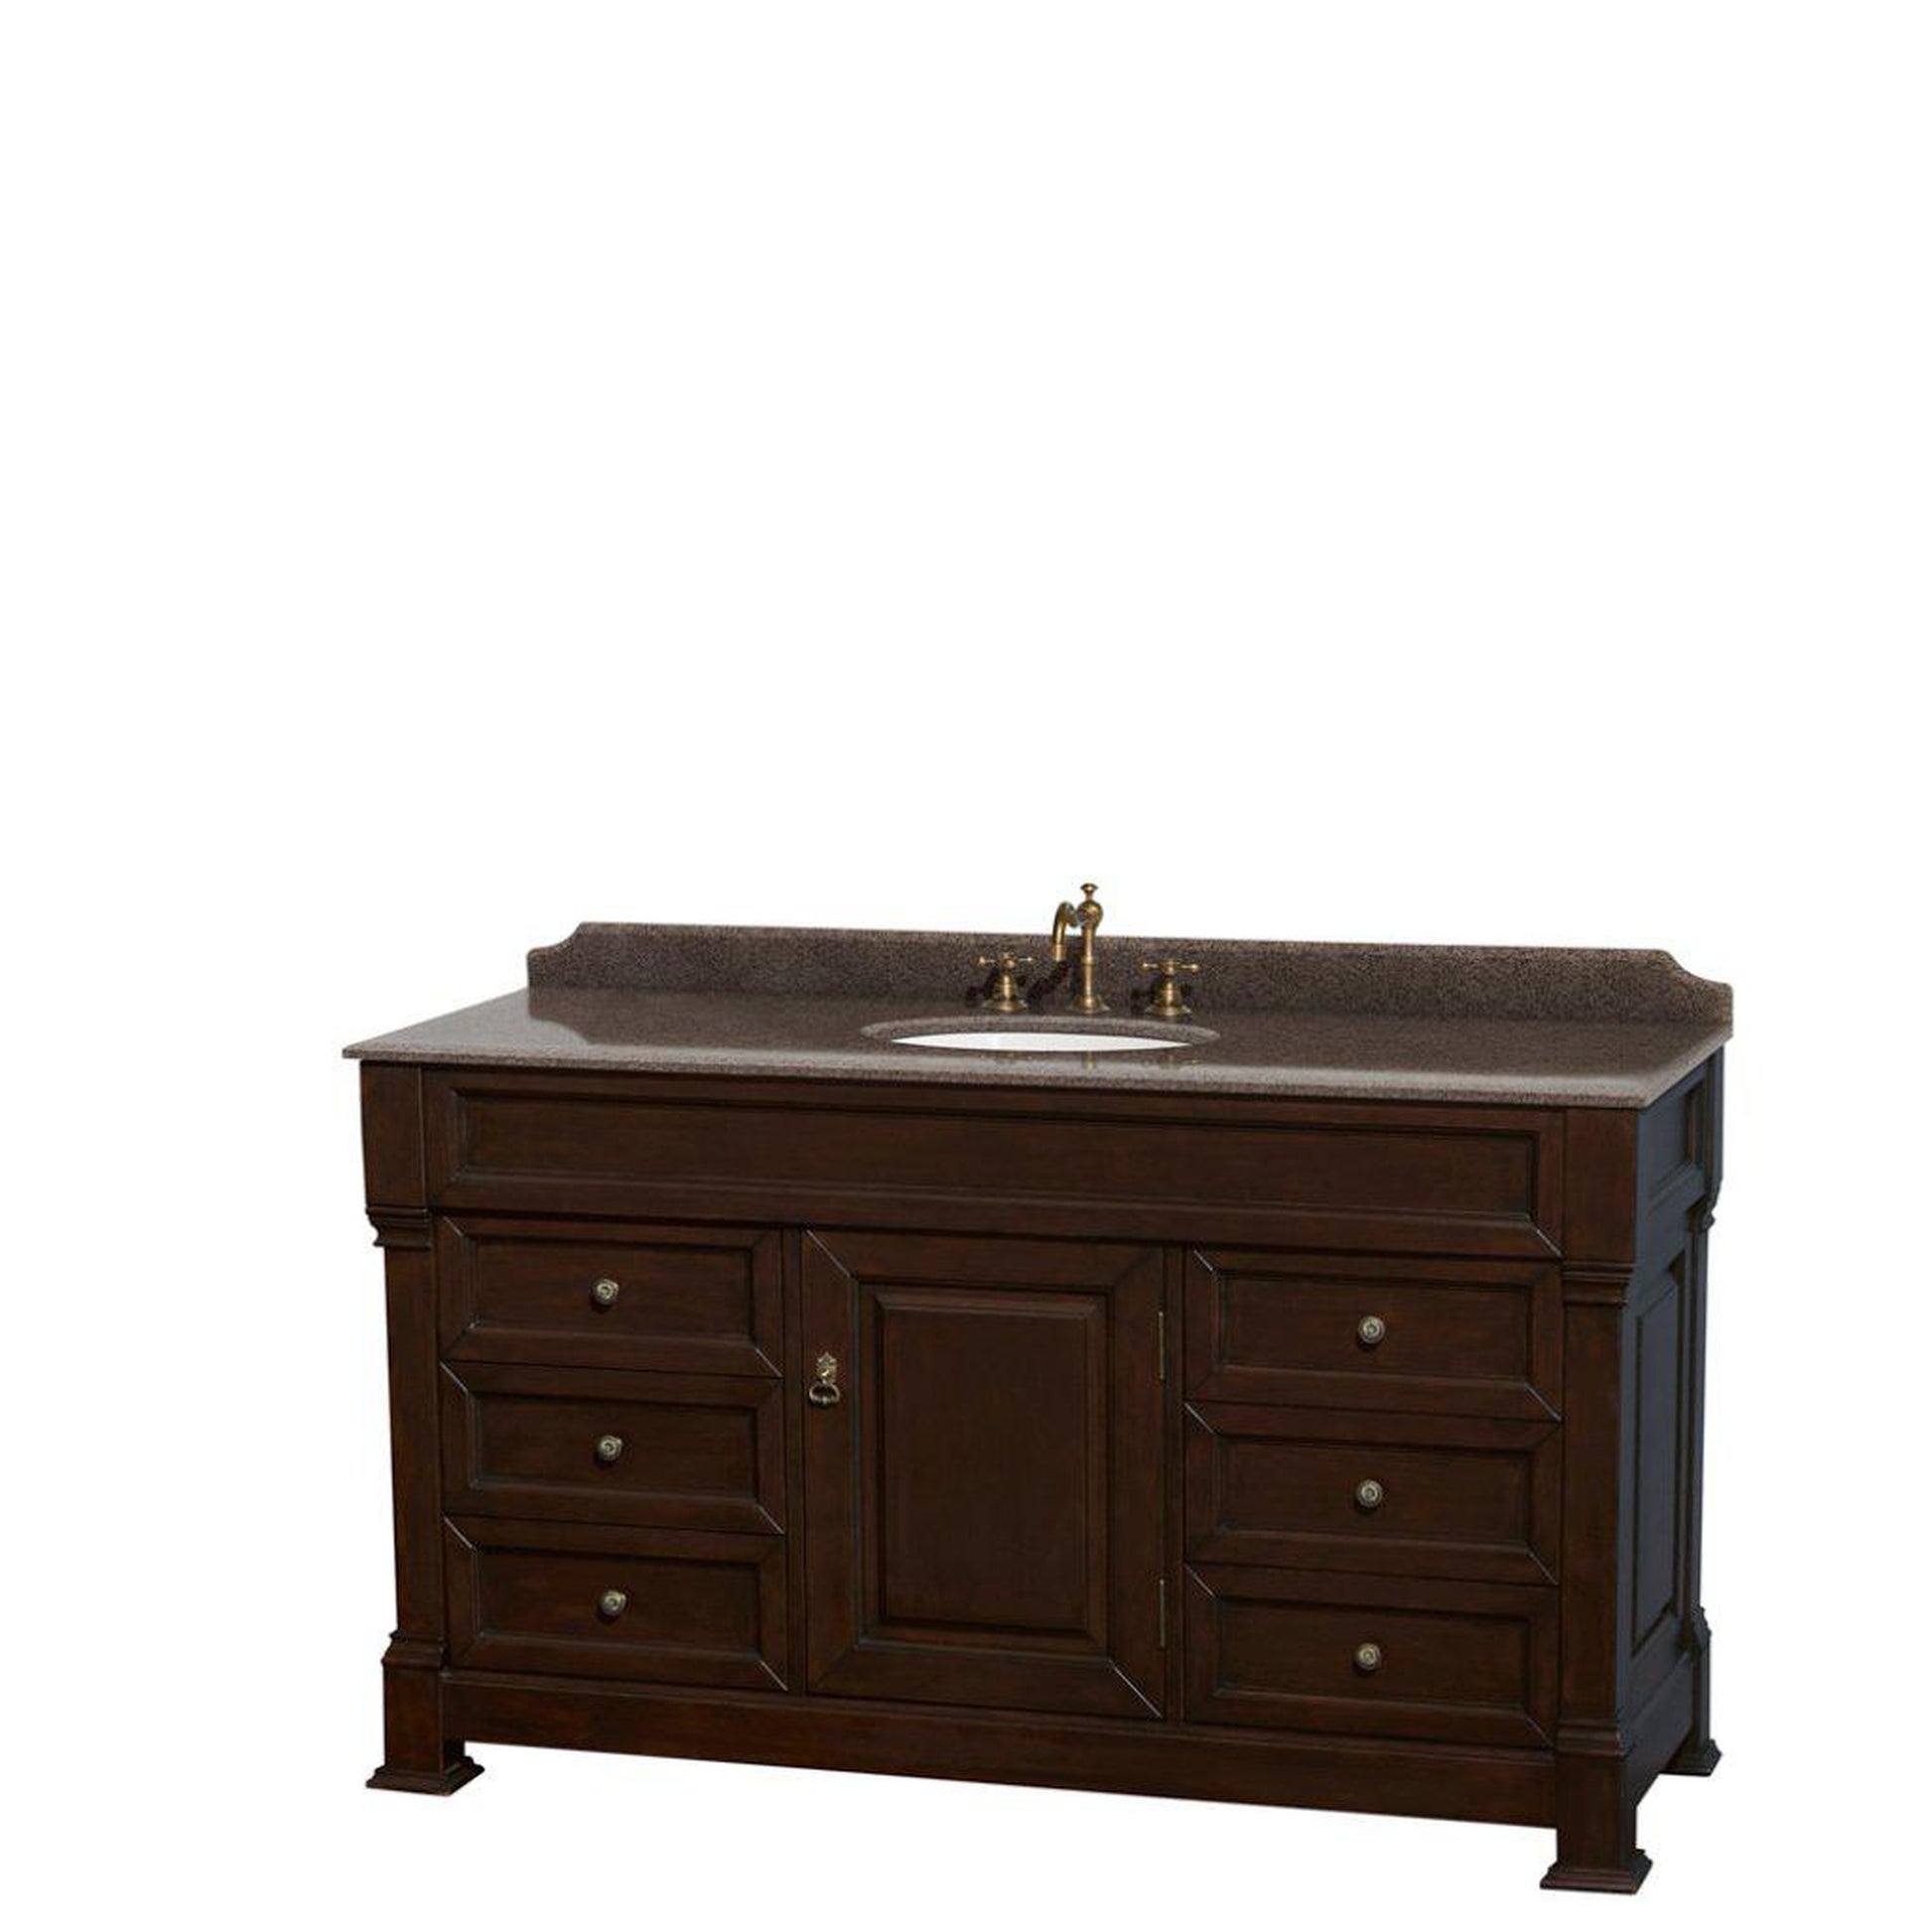 Wyndham Collection Andover 60" Single Bathroom Dark Cherry Vanity With Imperial Brown Granite Countertop And Undermount Oval Sink, And No Mirror